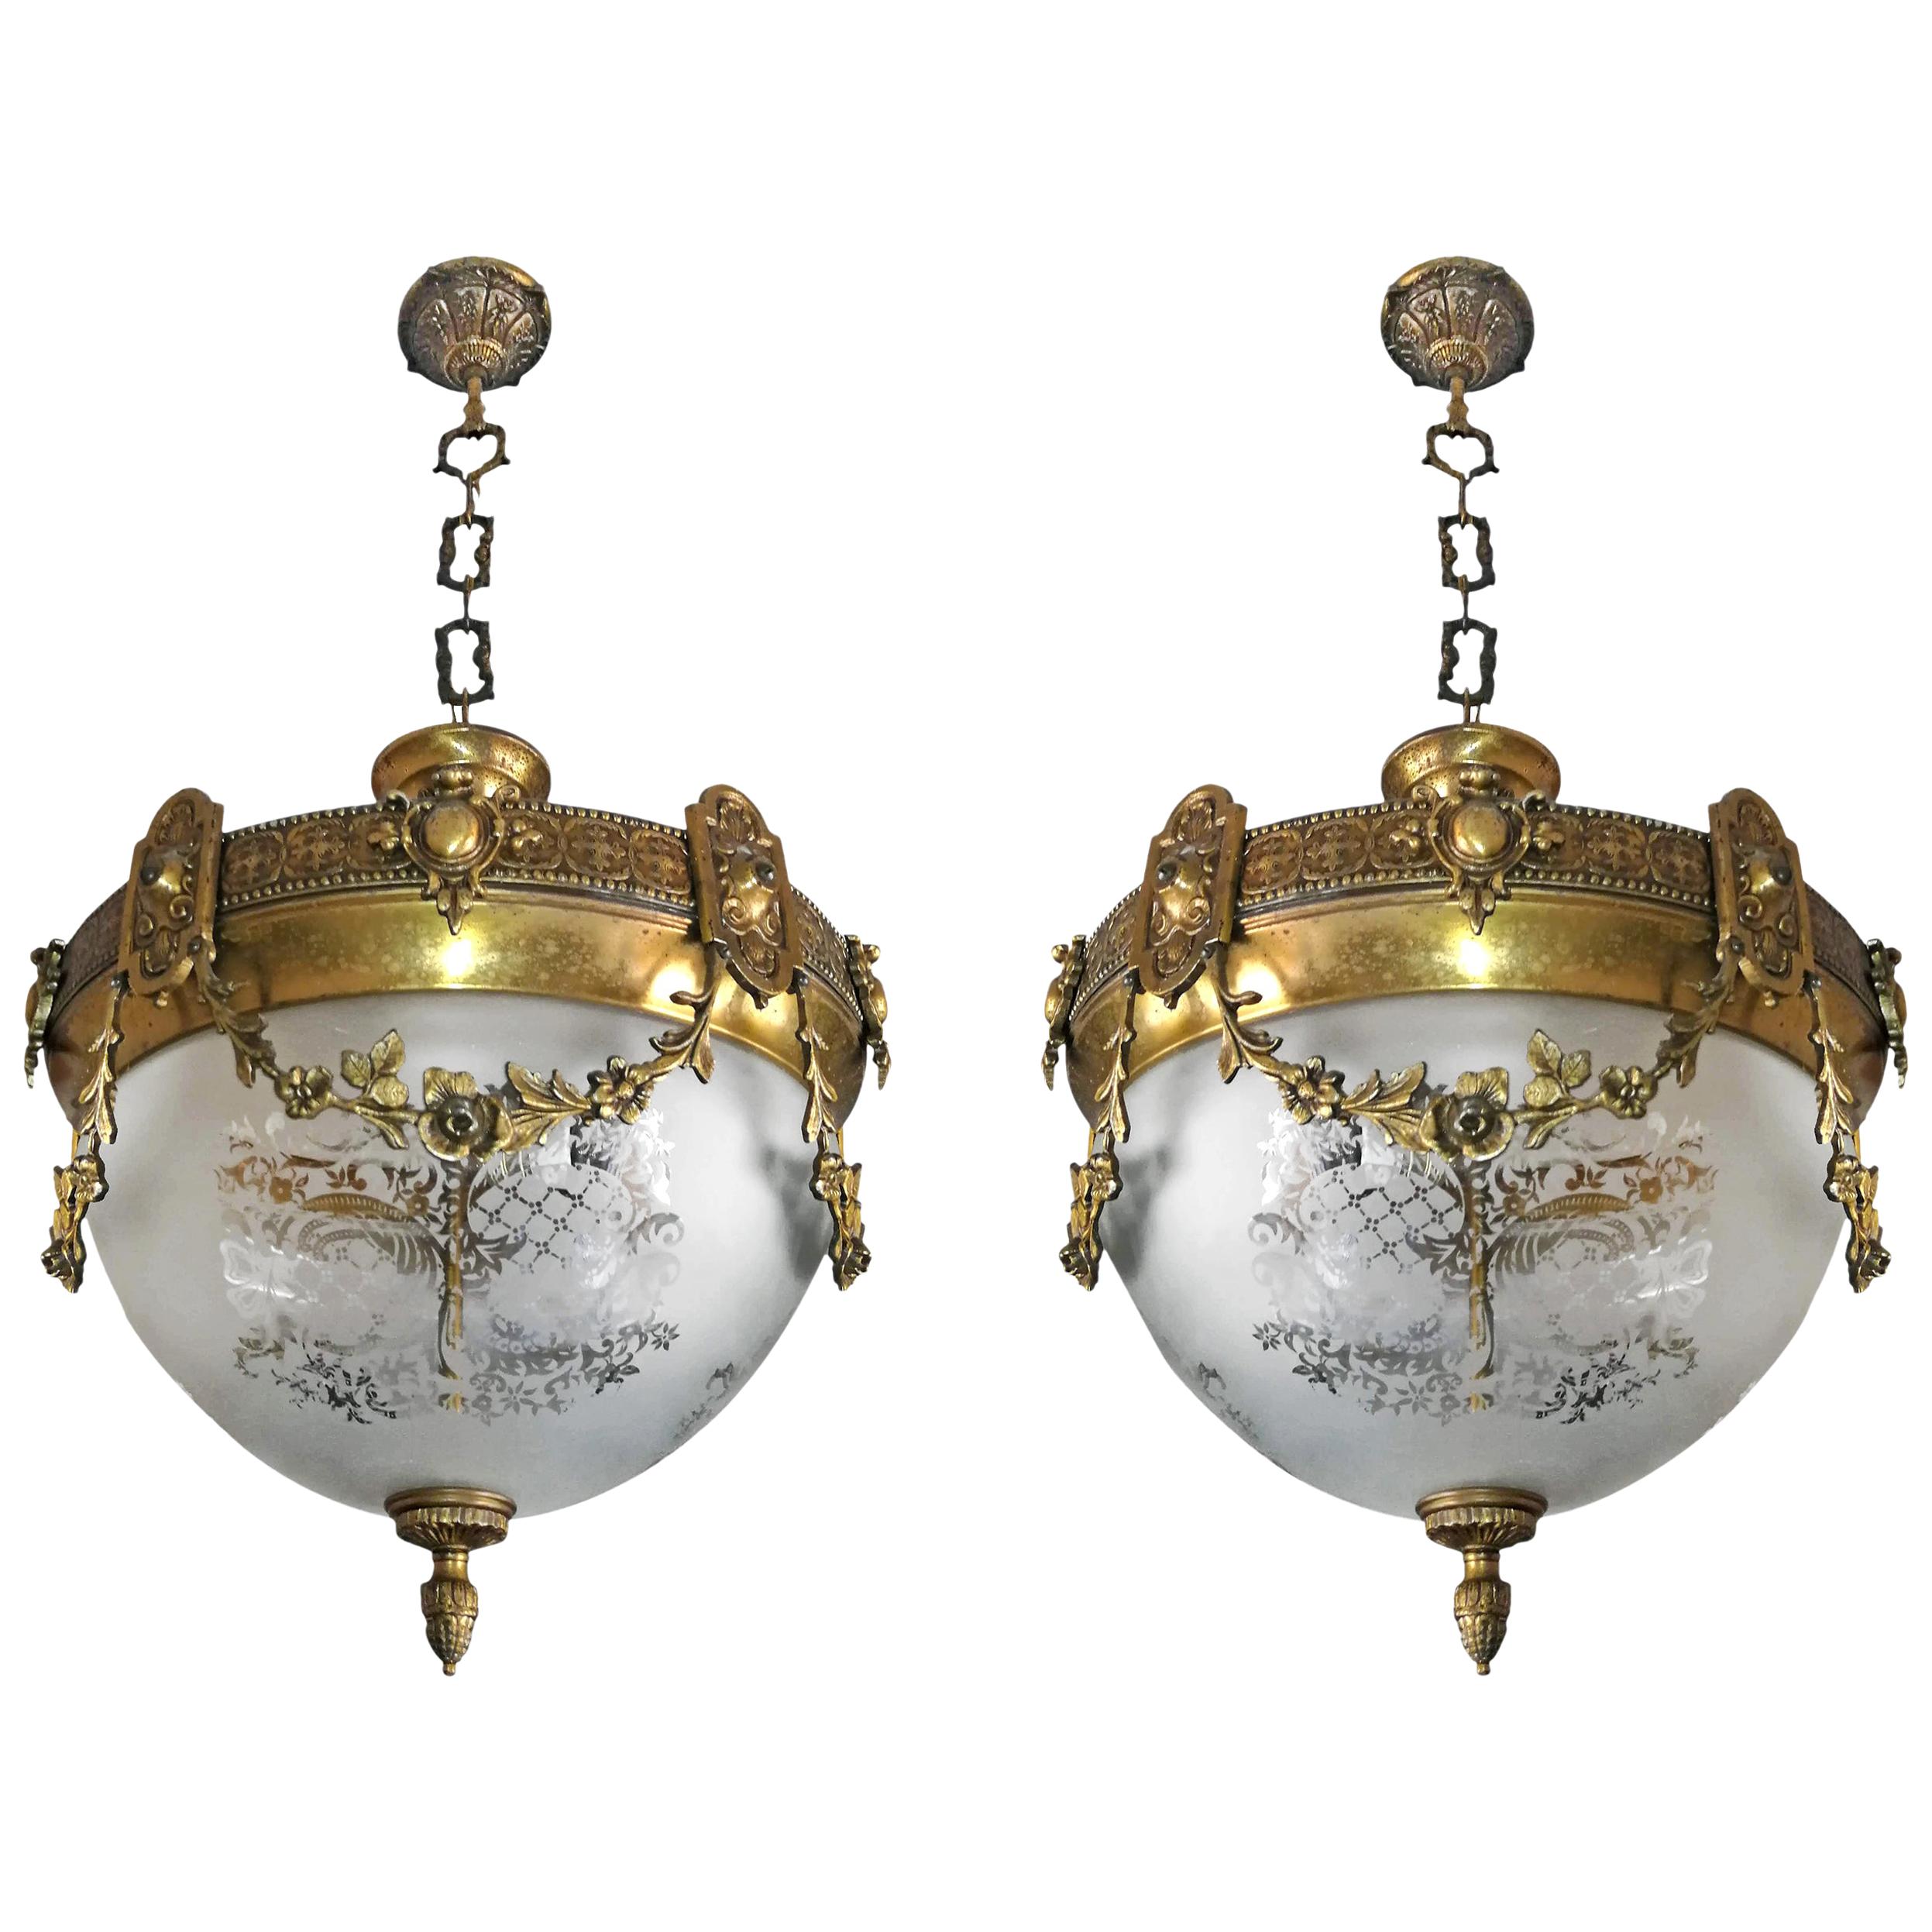 Pair of French Art Nouveau Bronze & Brass Etched Glass Chandeliers, Flush Mounts